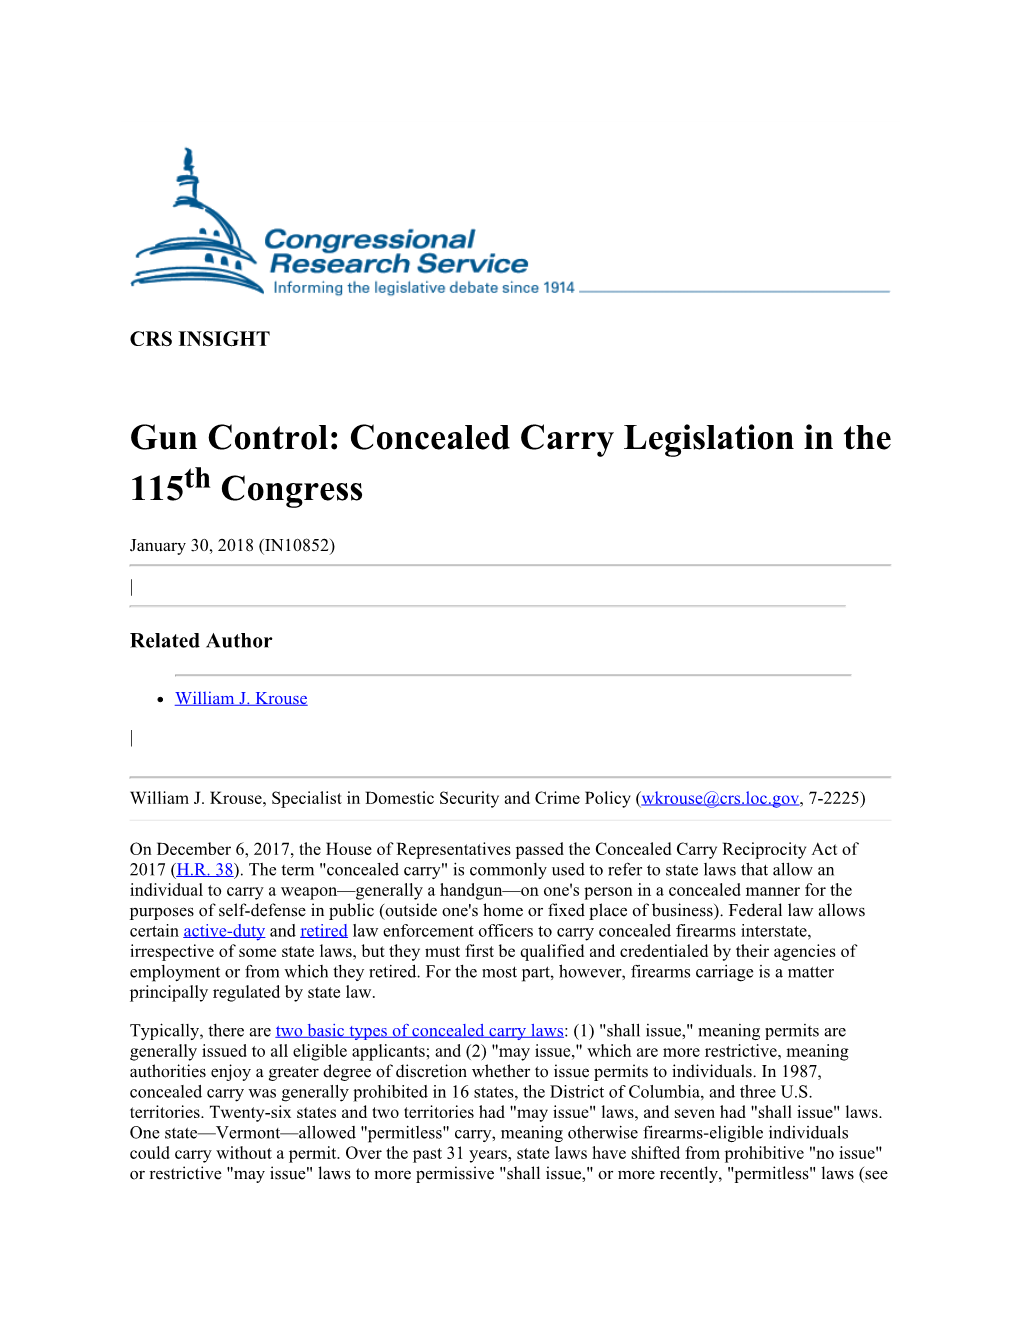 Gun Control: Concealed Carry Legislation in the 115Th Congress